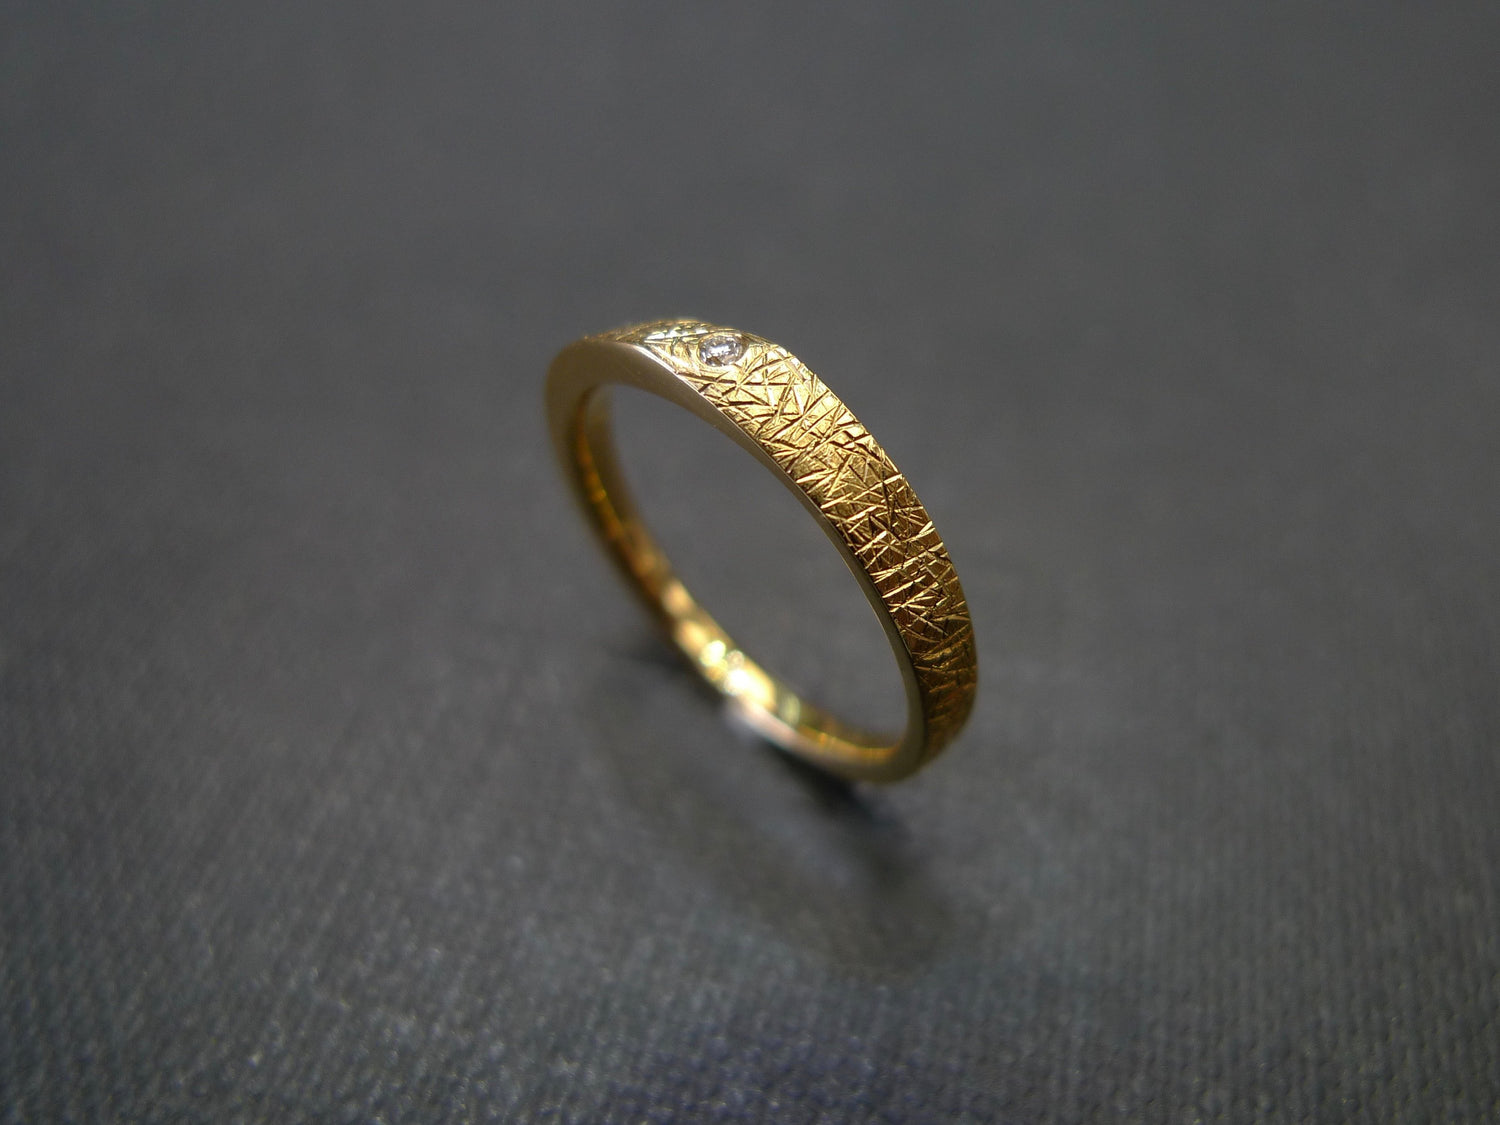 Hand Carved Diamond Wedding Ring in 18K Yellow Gold - HN JEWELRY